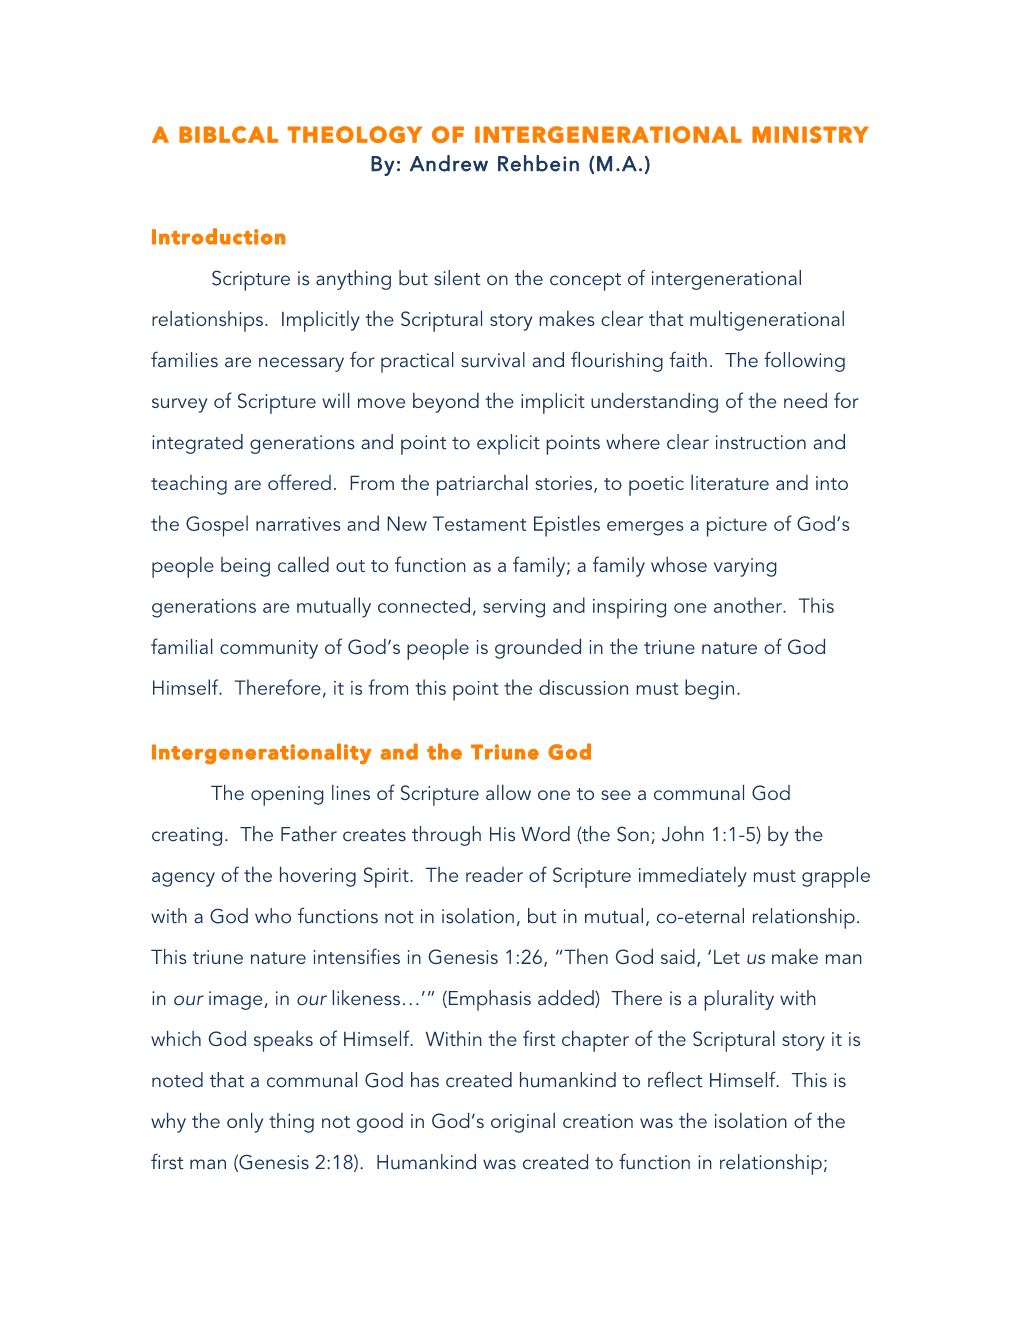 A BIBLCAL THEOLOGY of INTERGENERATIONAL MINISTRY By: Andrew Rehbein (M.A.)